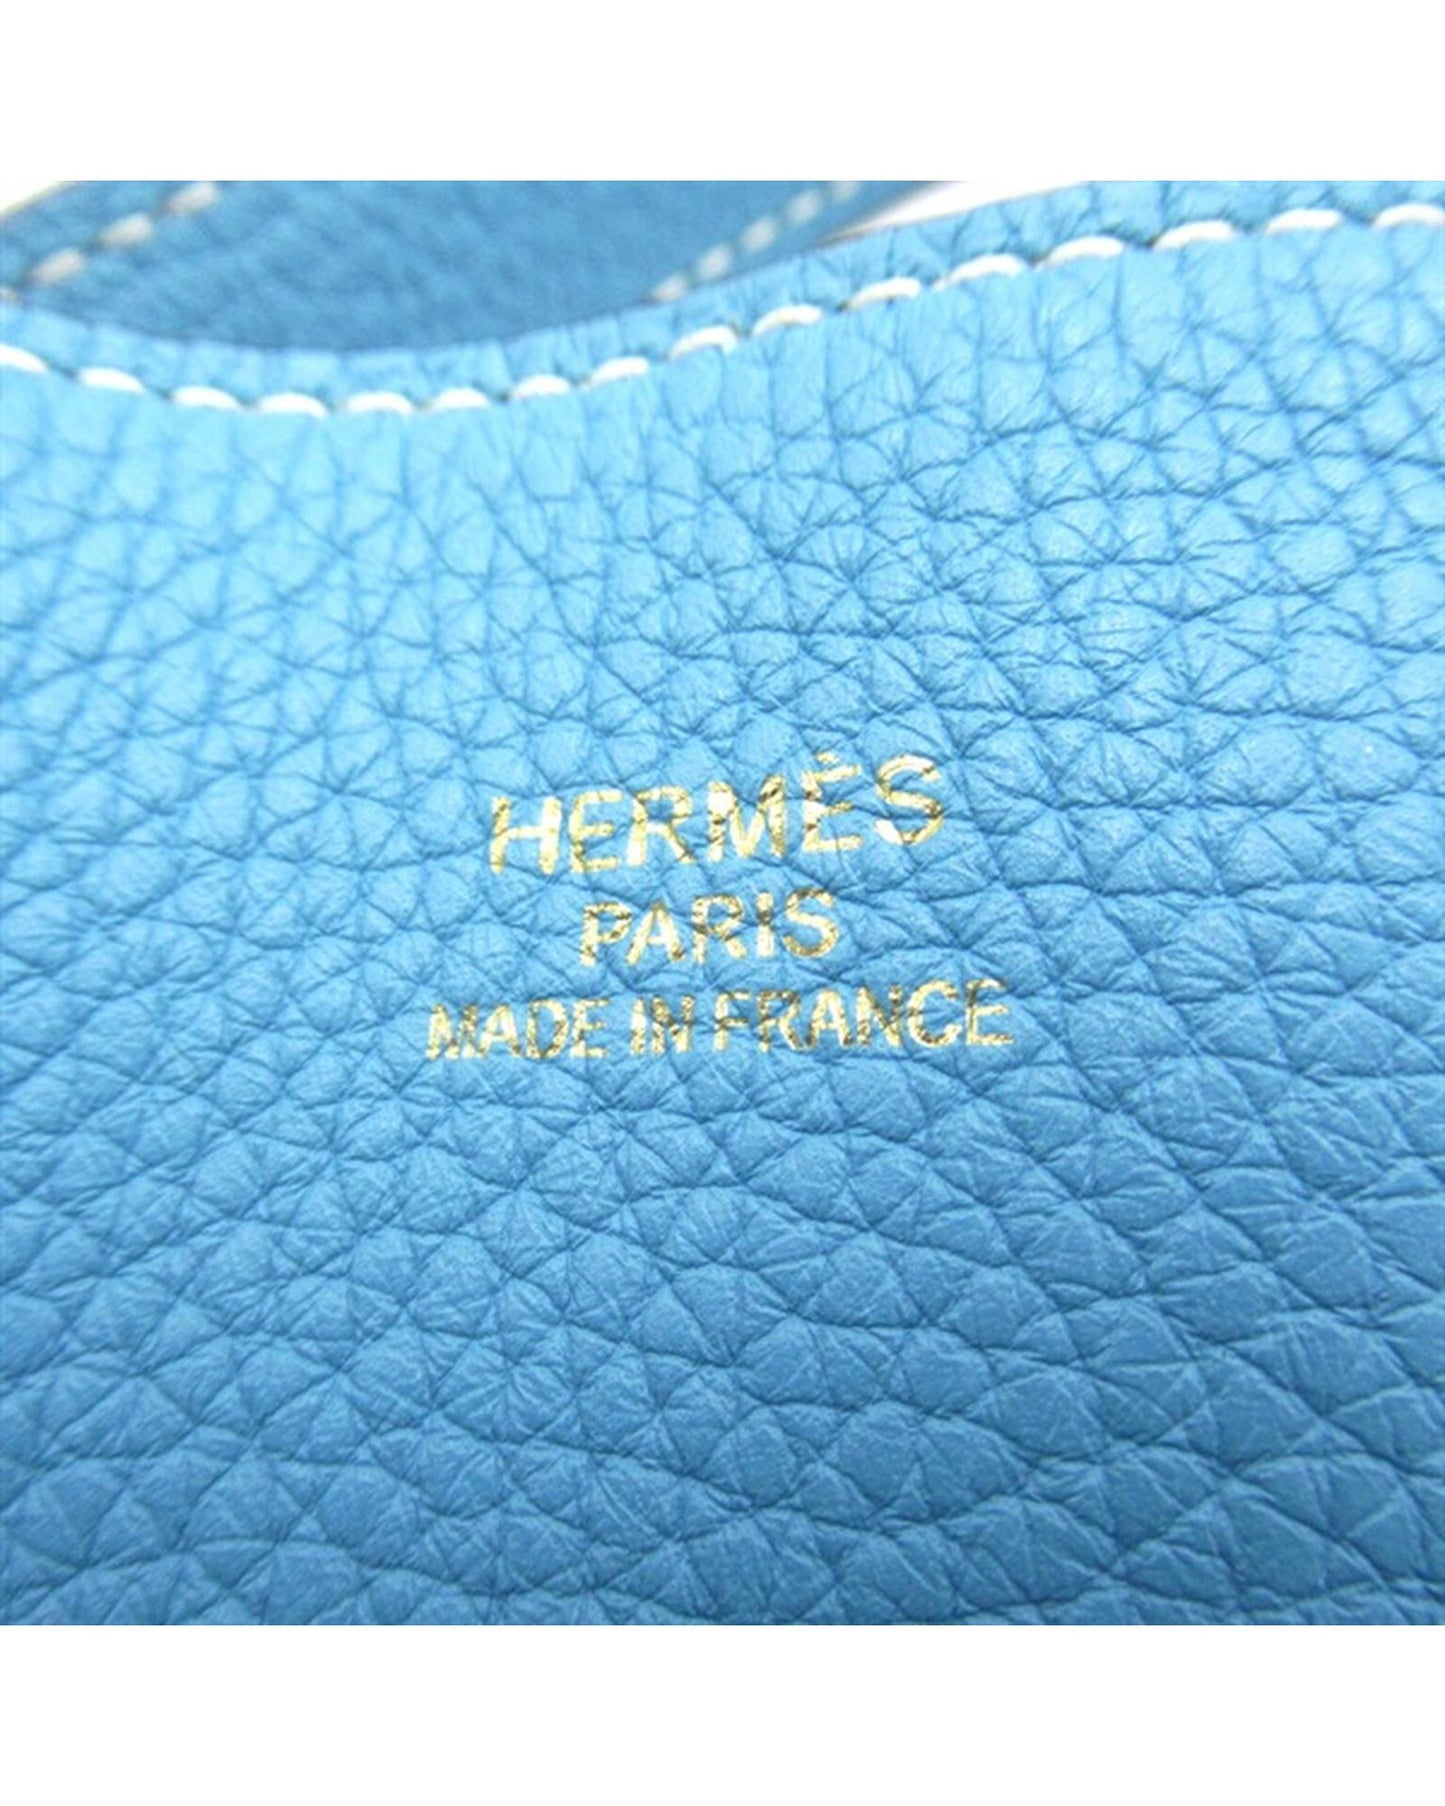 Hermes Women's Reversible Tote Bag in Blue Clemence Leather in Blue